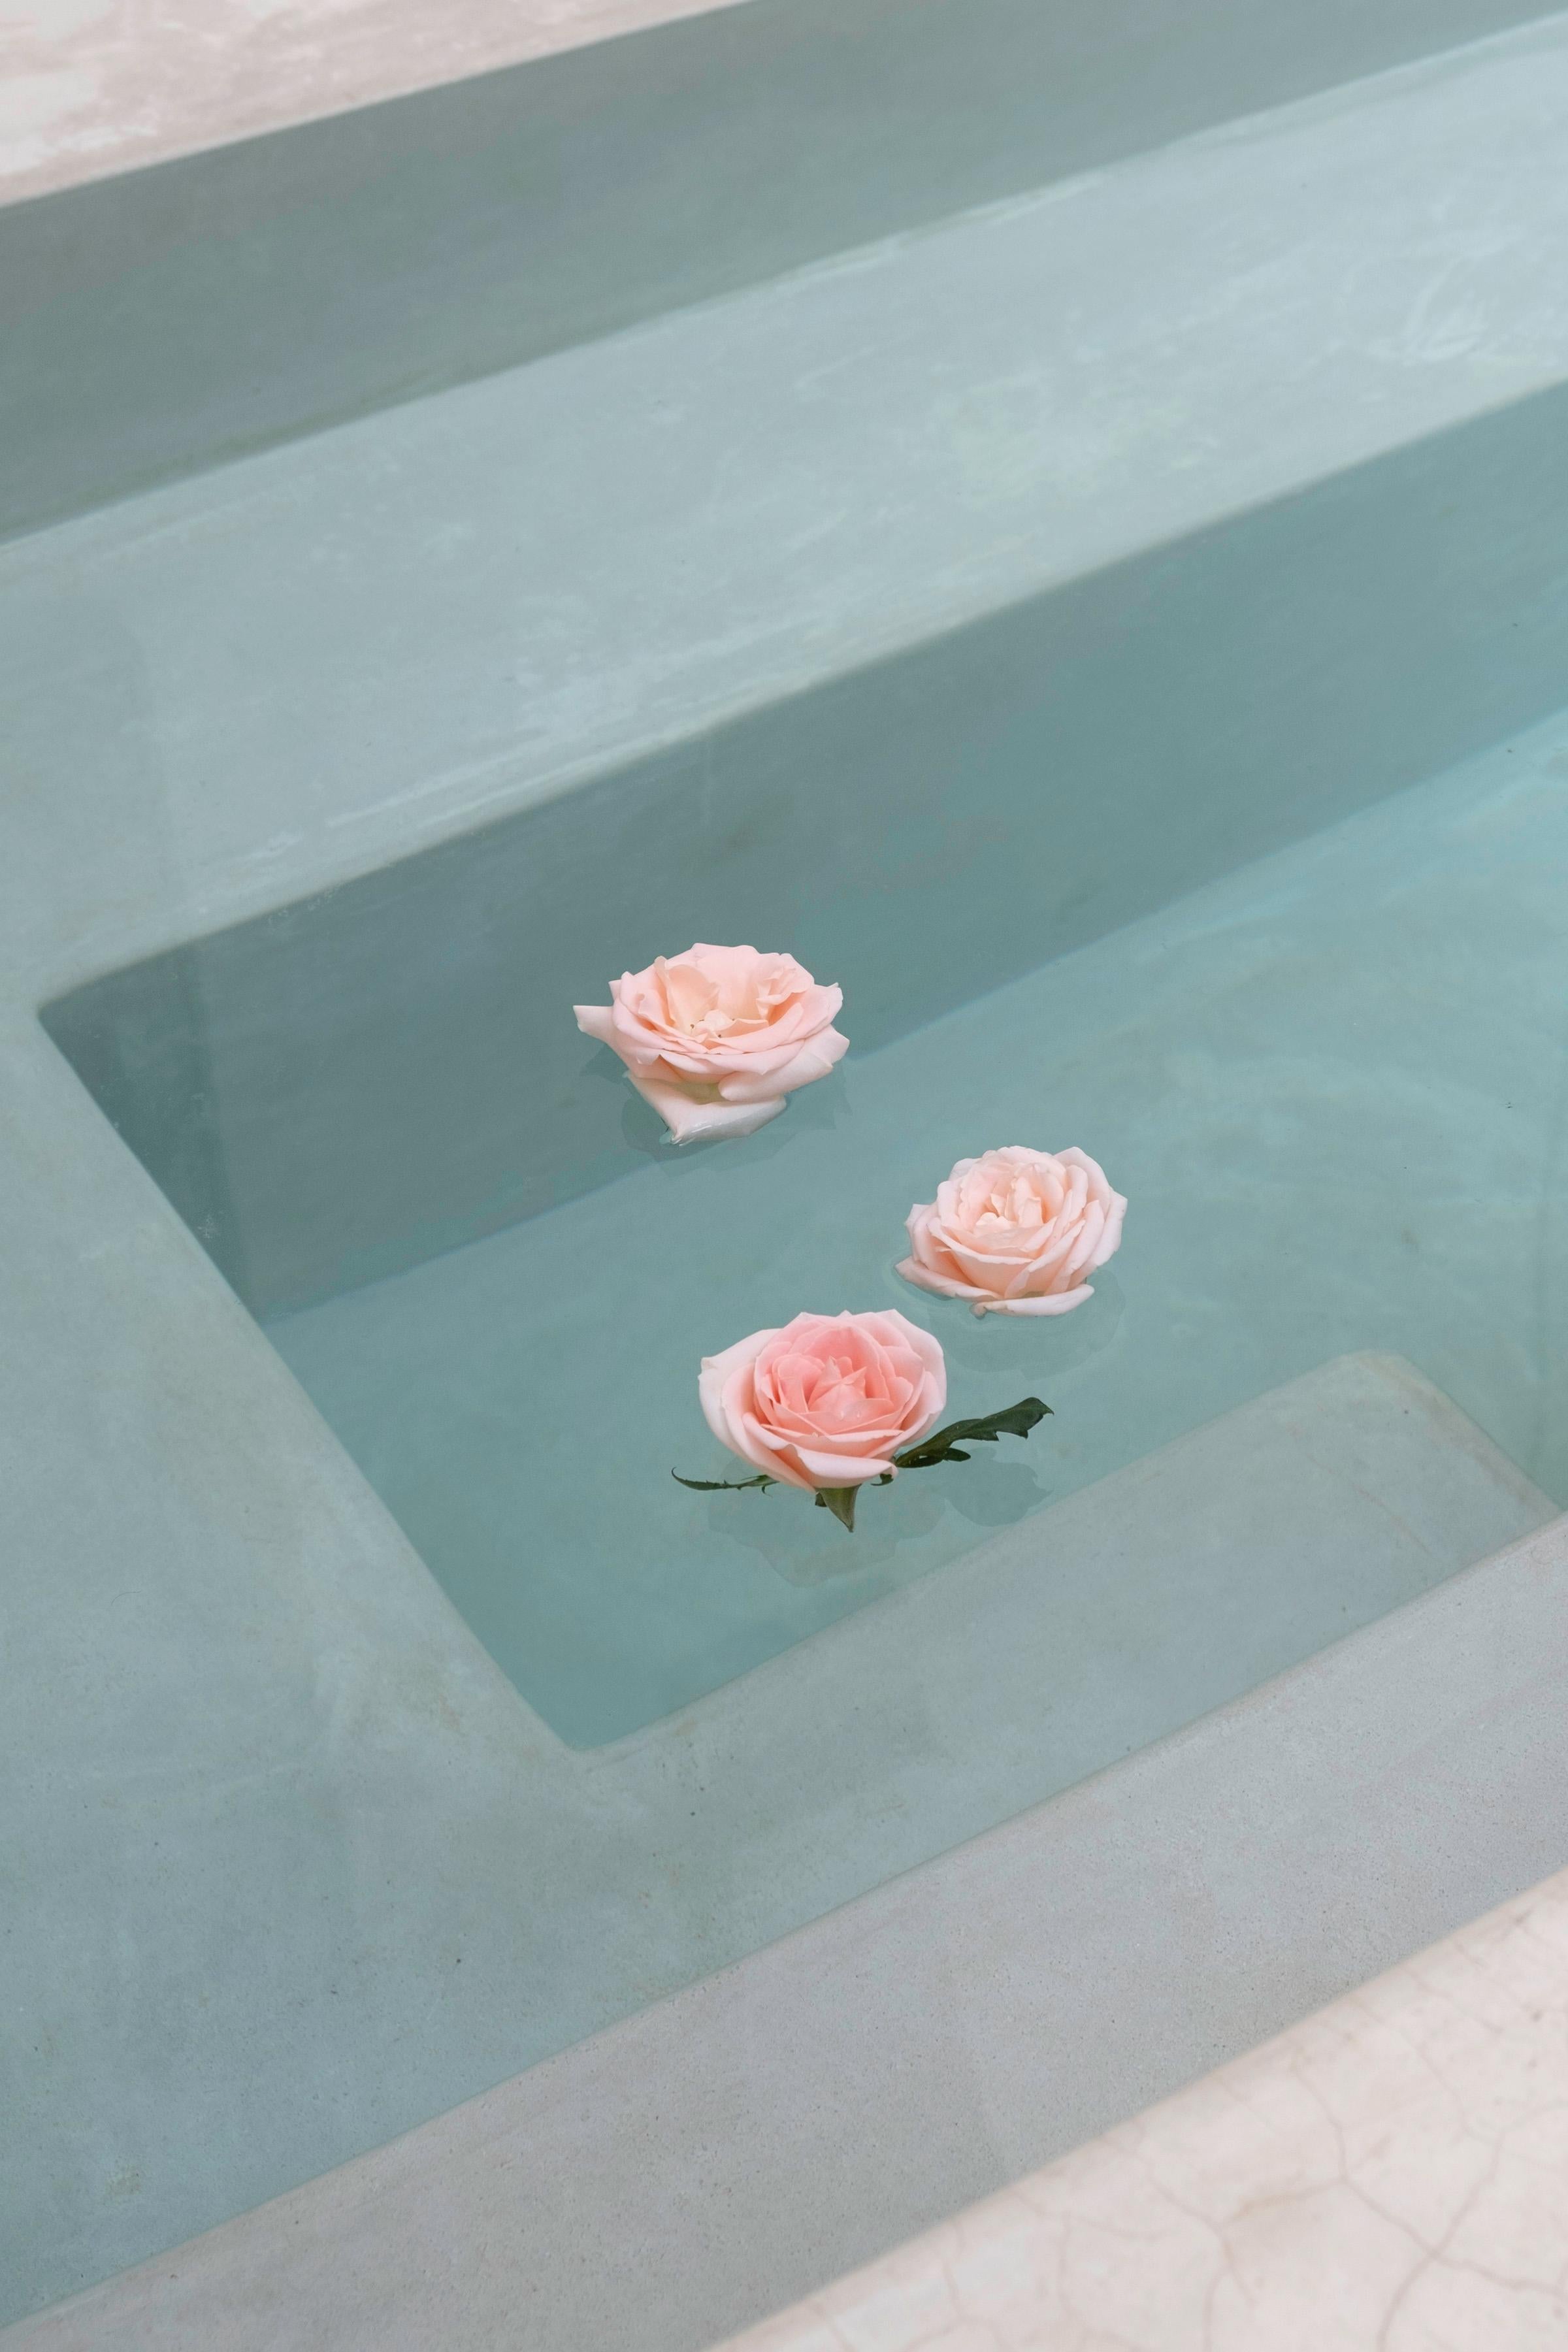 Roses Floating - Gray Color Photograph by Clemente Vergara